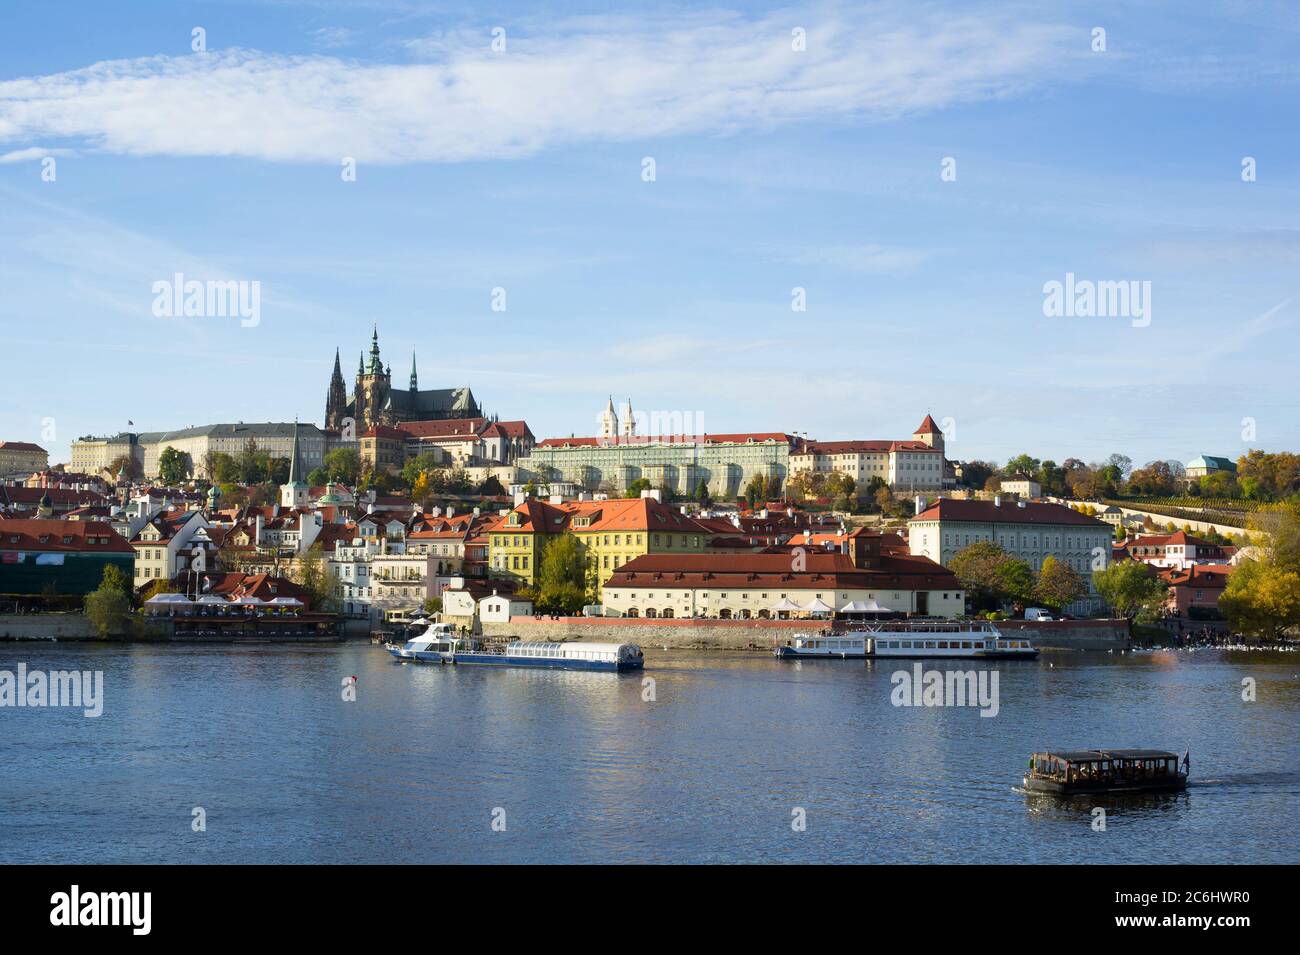 Prague Castle, Hradcany, Prague, Czech Republic / Czechia - panorama of historical part of the city. Dominant towers of Saint Vitus Cathedral. Boats w Stock Photo